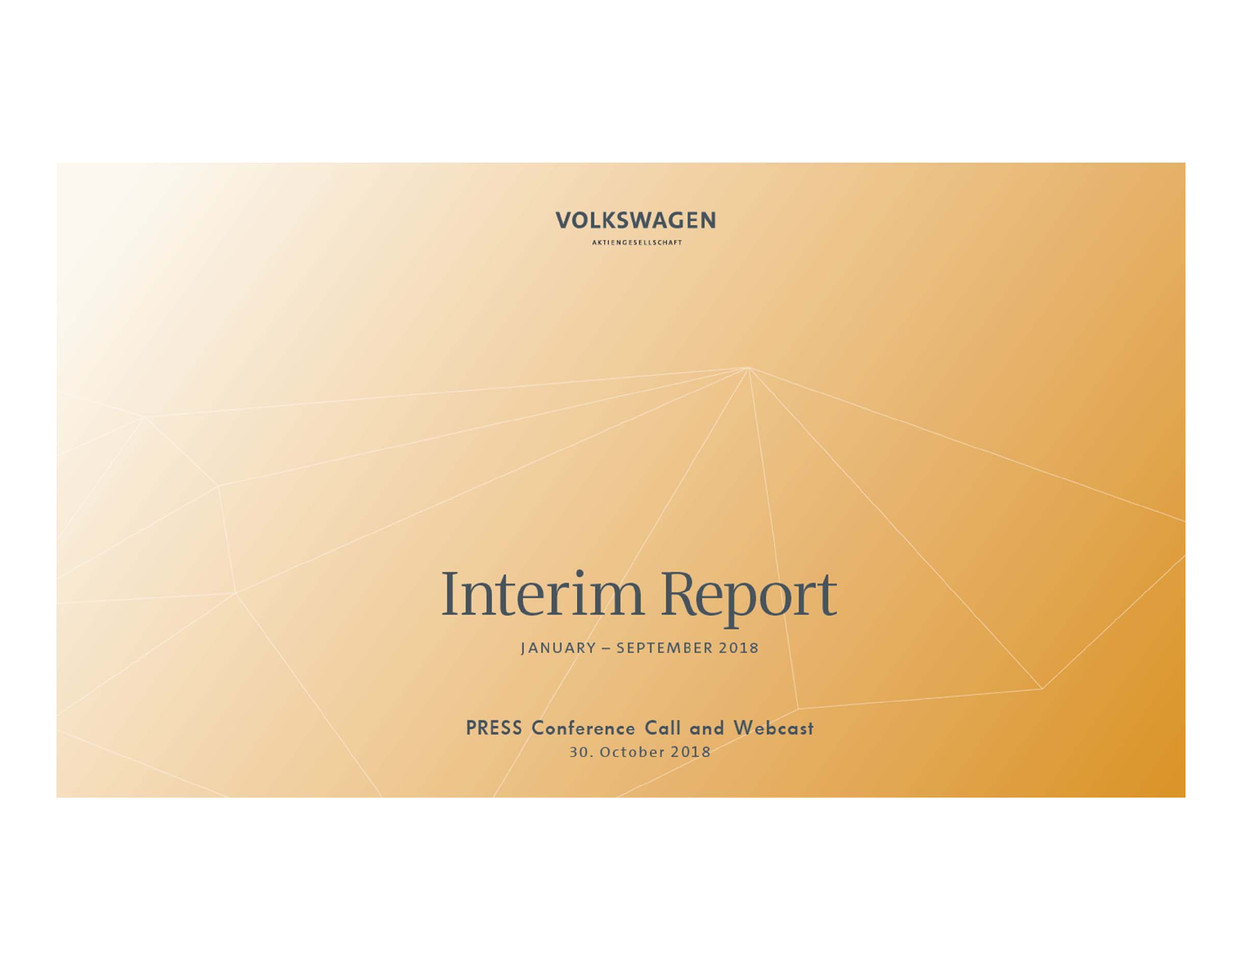 PRESS Conference Call and Webcast / Interim Report January - September 2018